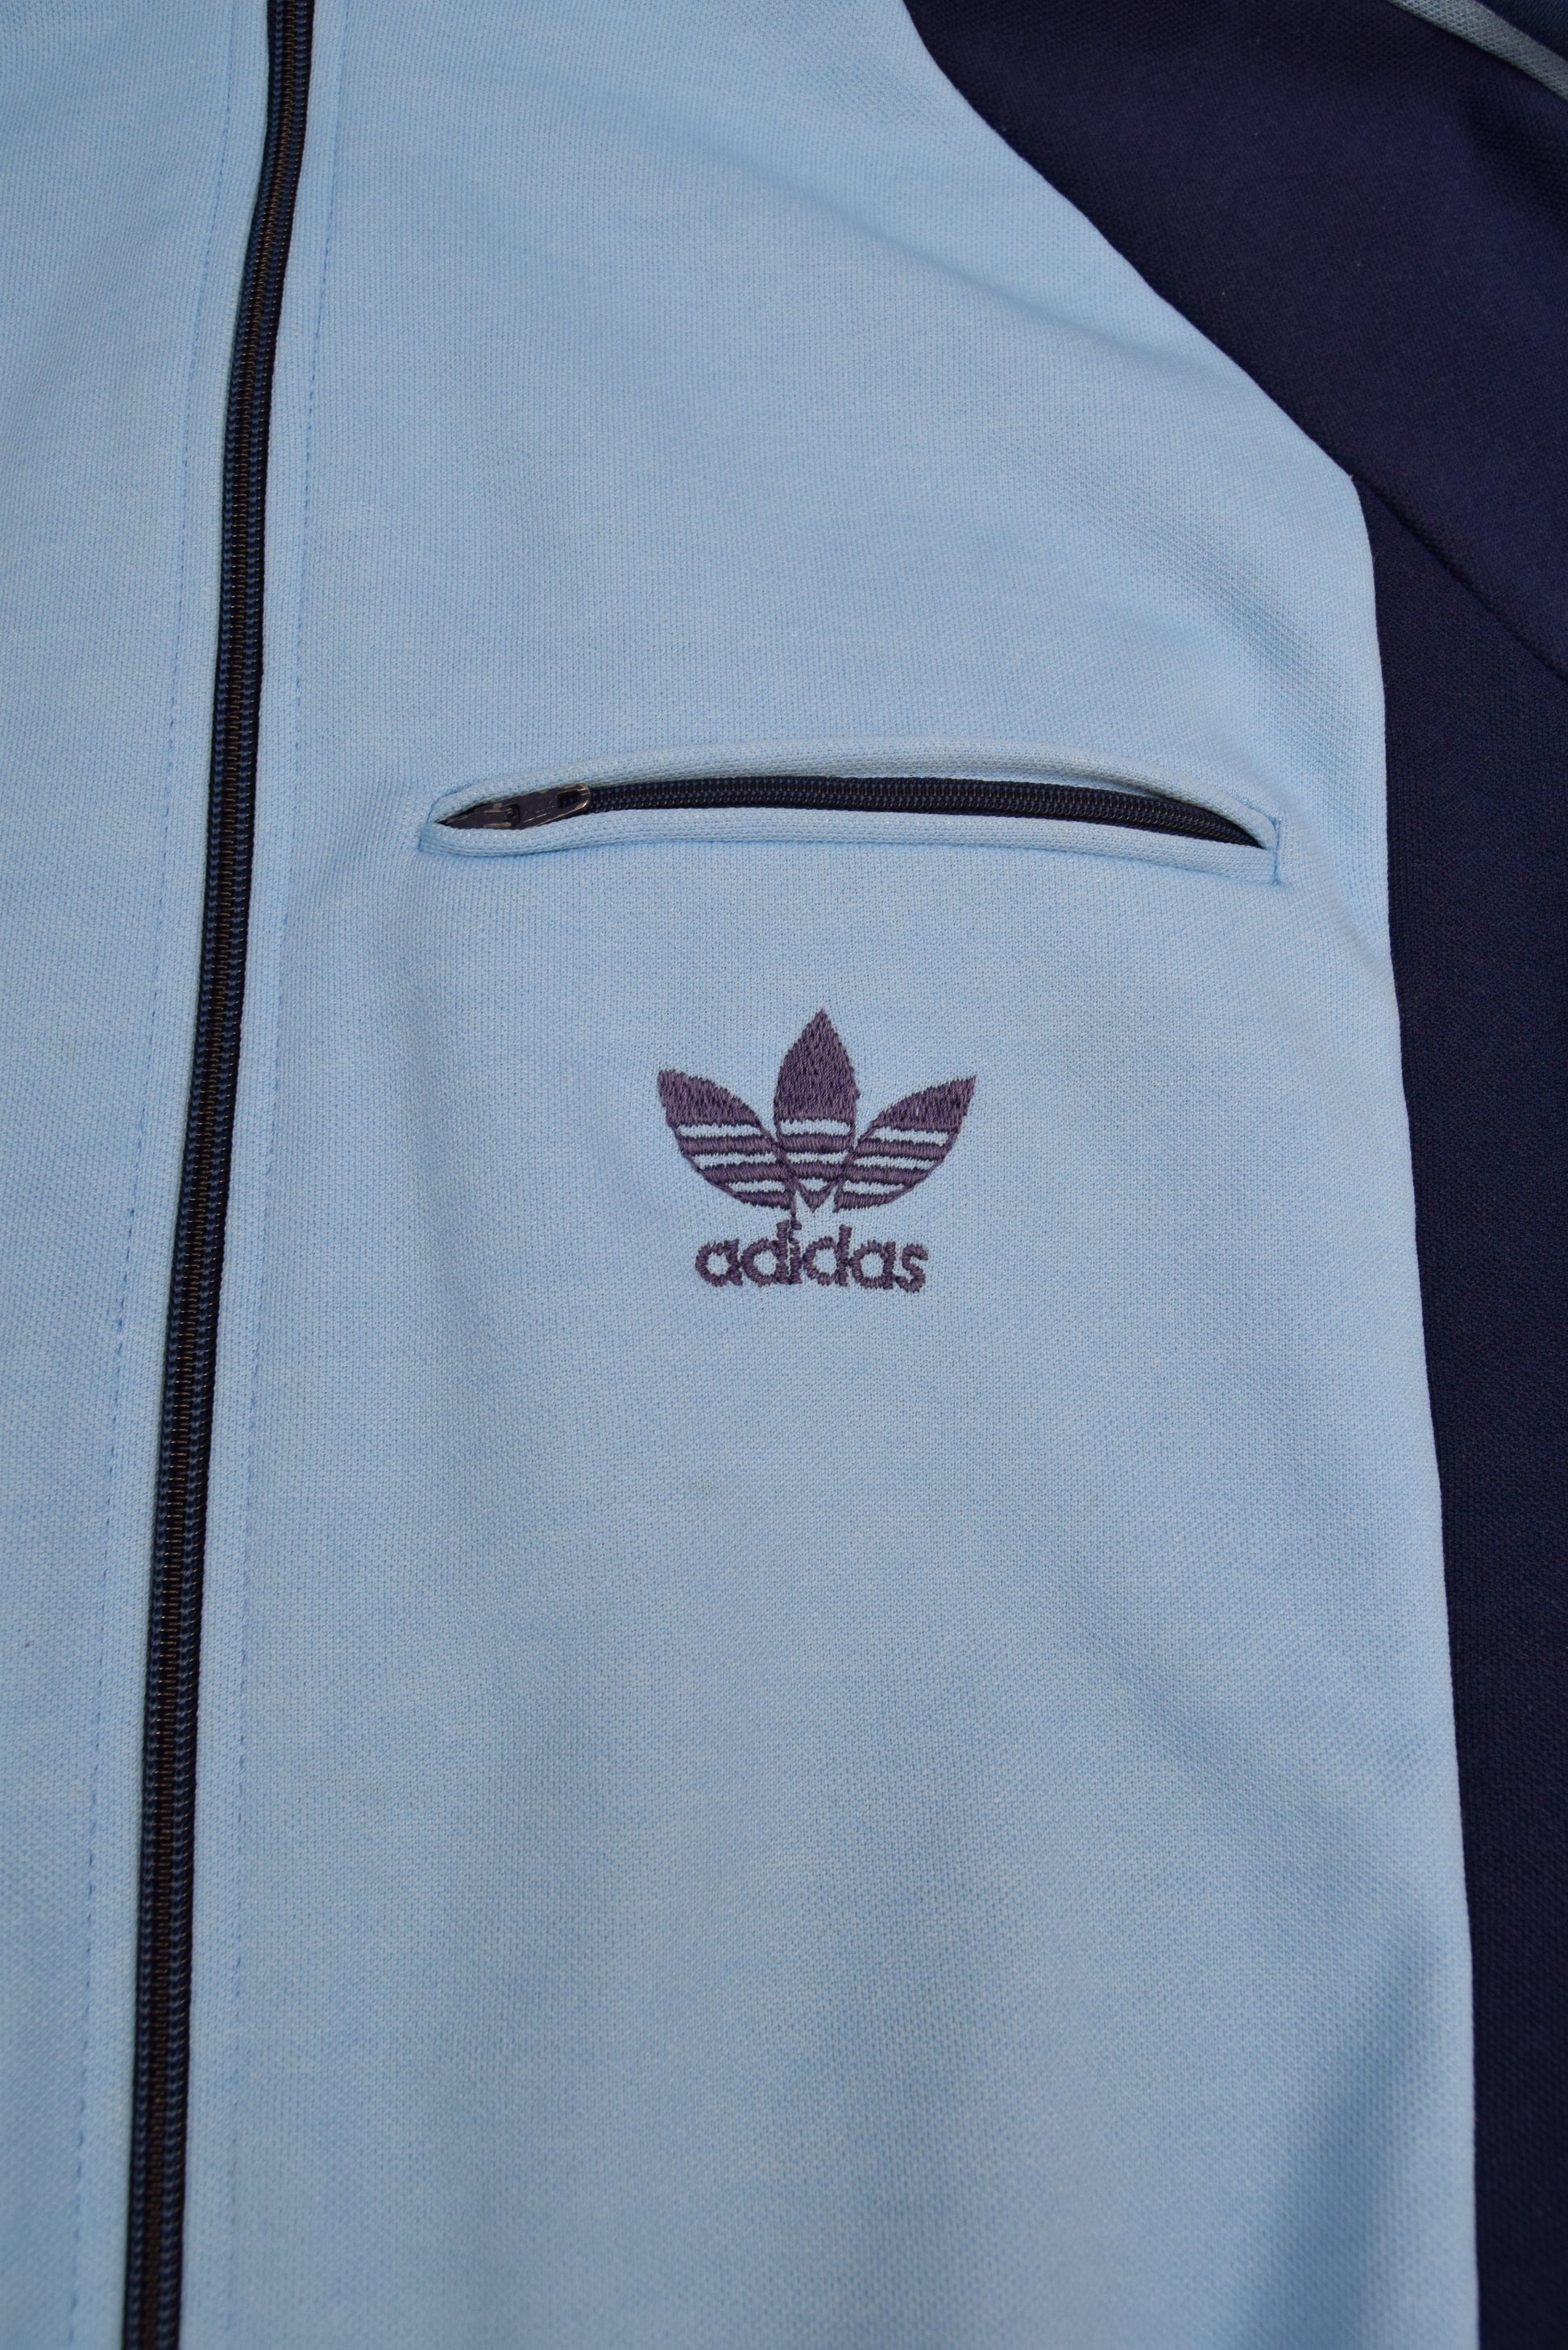 Vintage 70's 80's Adidas Ventex Jacket Track Top Made in France Blue Polyester Cotton Viscose